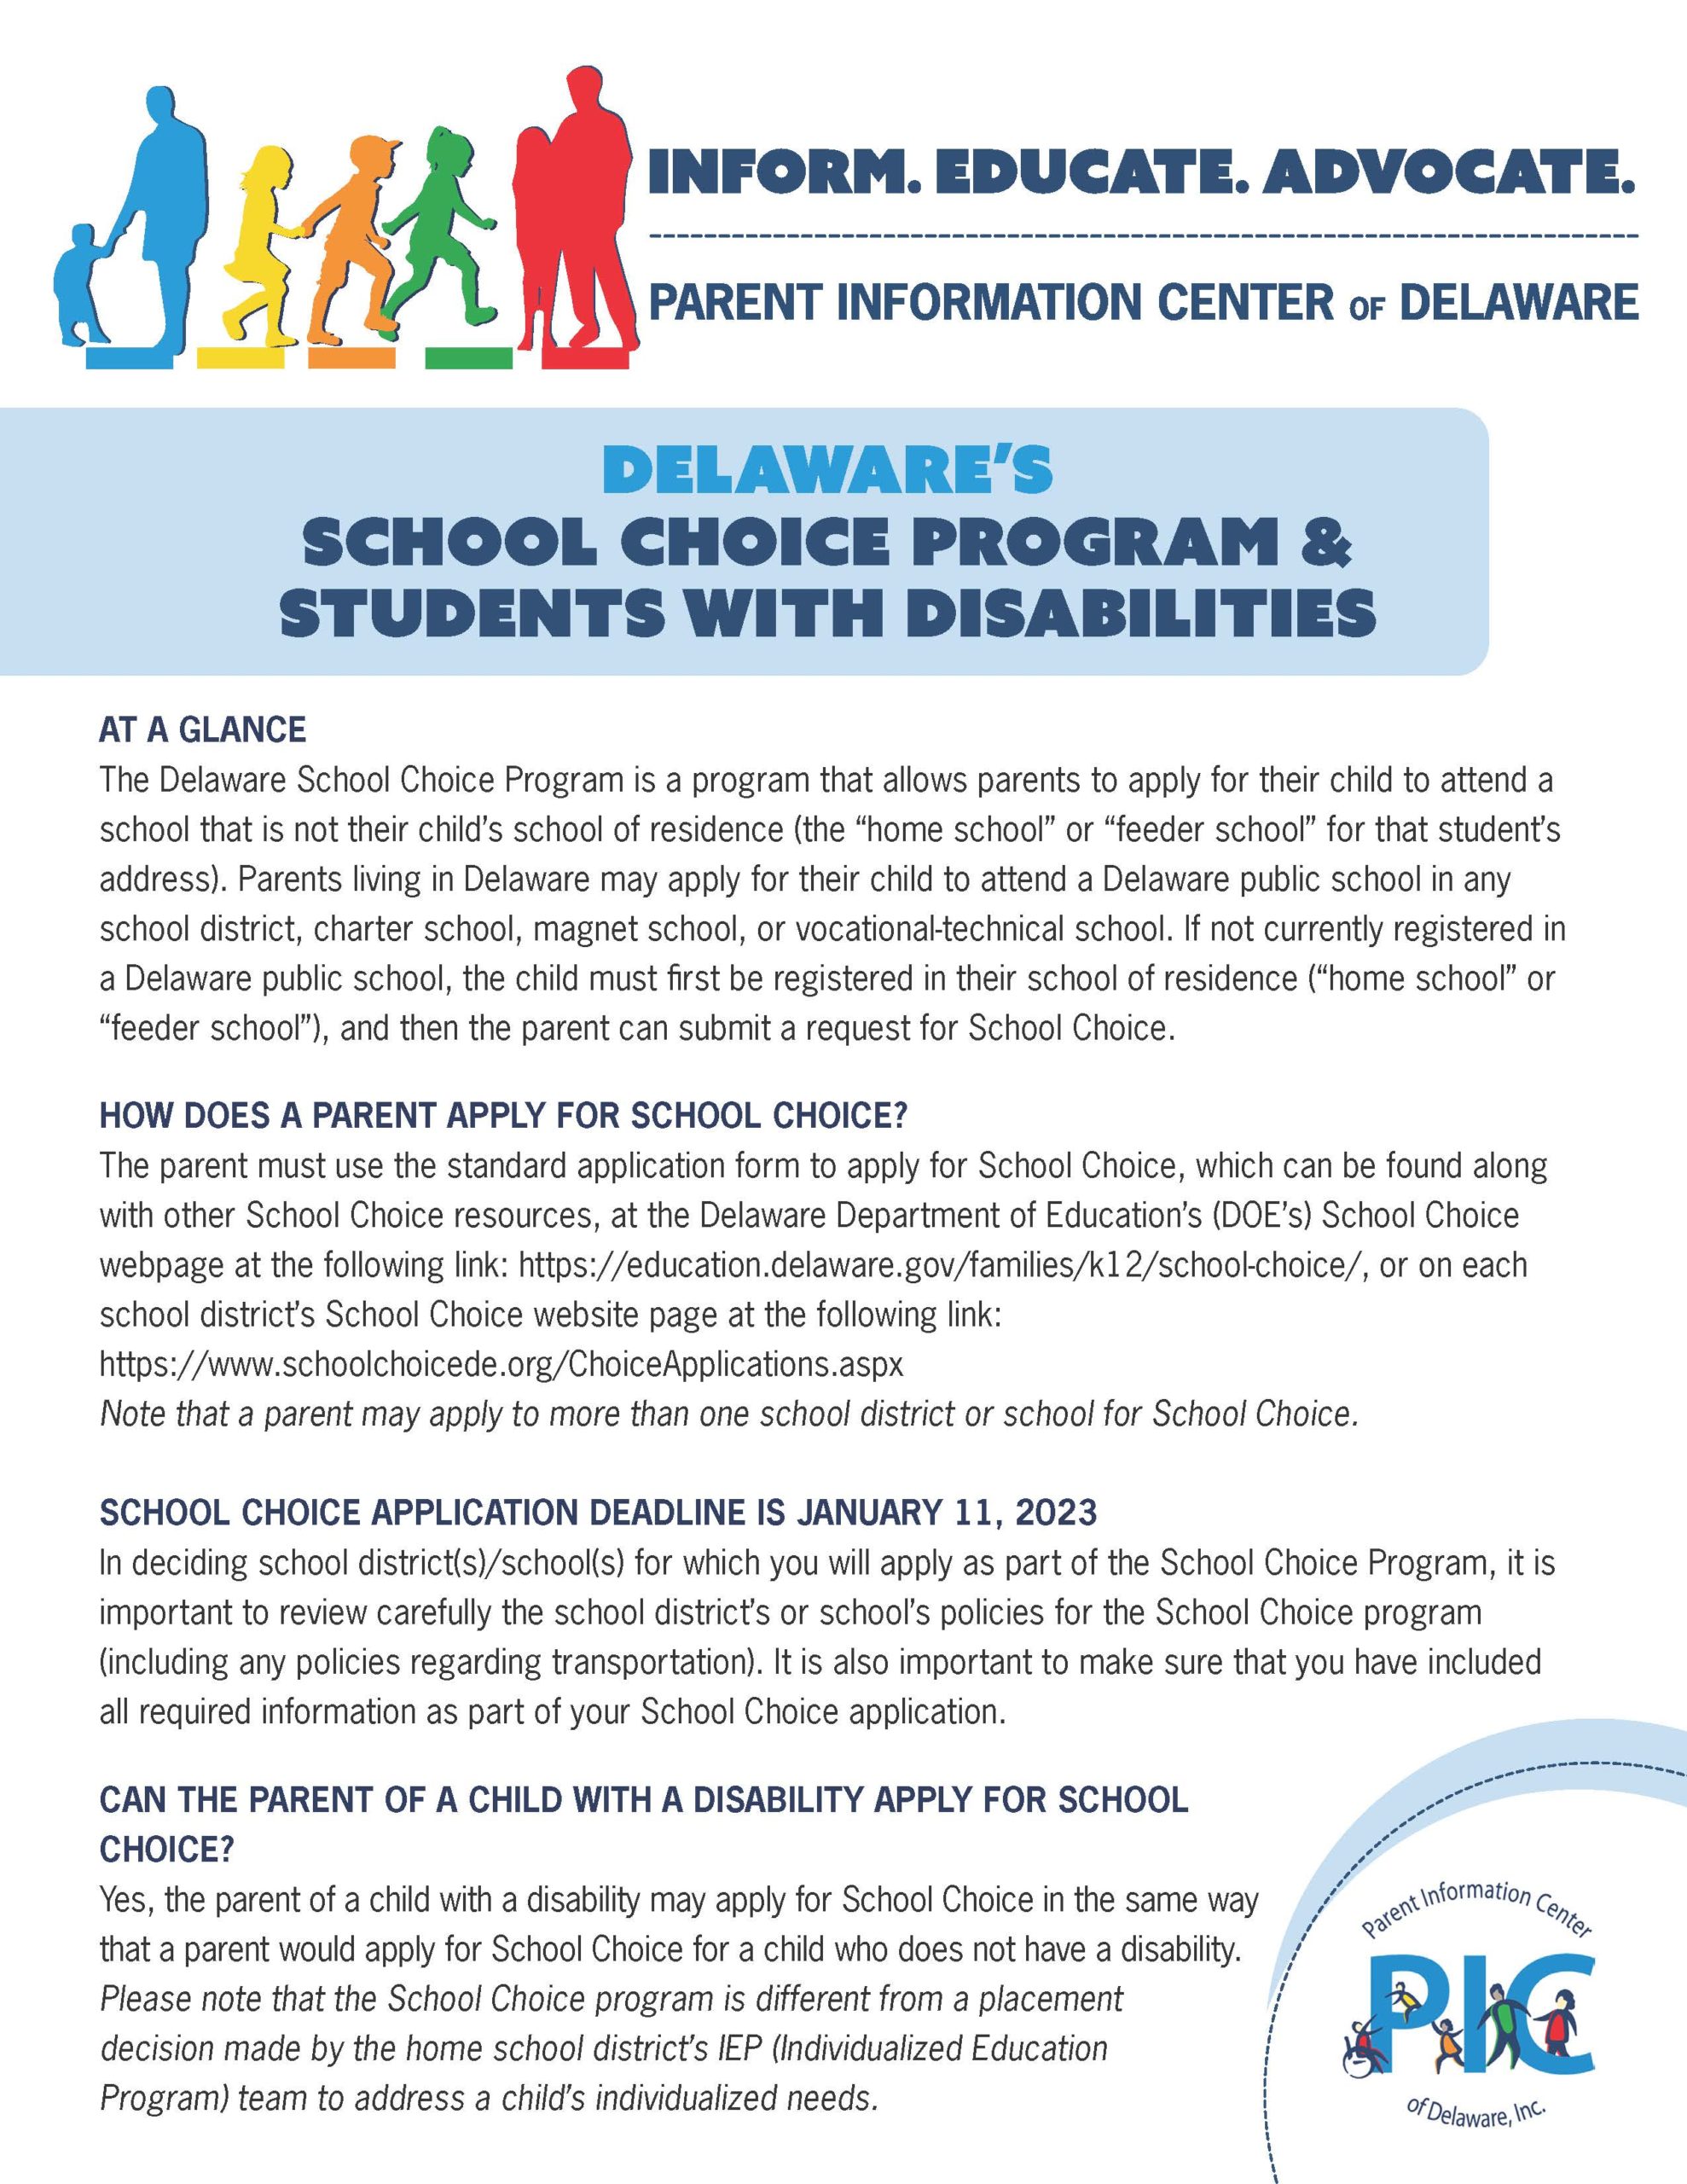 PIC Fact Sheet of the Week-School Choice